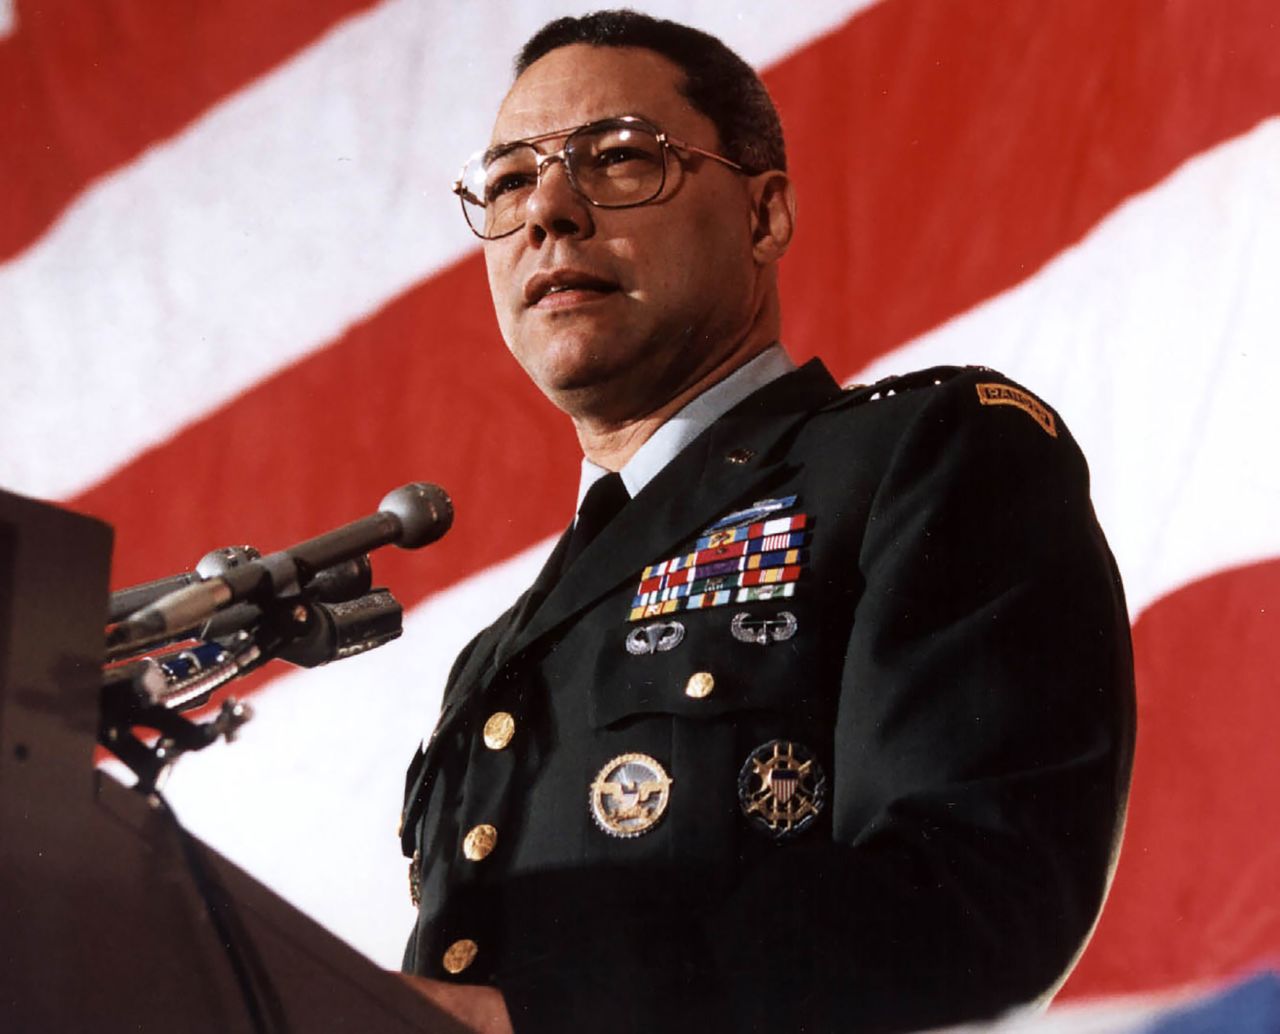 <a href="https://www.cnn.com/2021/10/18/politics/colin-powell-dies/index.html" target="_blank">Colin Powell,</a> a trailblazing military leader who went on to become the United States' first Black secretary of state, died October 18 at the age of 84. Powell died from complications from Covid-19, his family said on Facebook, noting he was fully vaccinated. Powell had multiple myeloma, a cancer of plasma cells that suppresses the body's immune response, as well as Parkinson's disease, Peggy Cifrino, Powell's longtime chief of staff, confirmed to CNN.